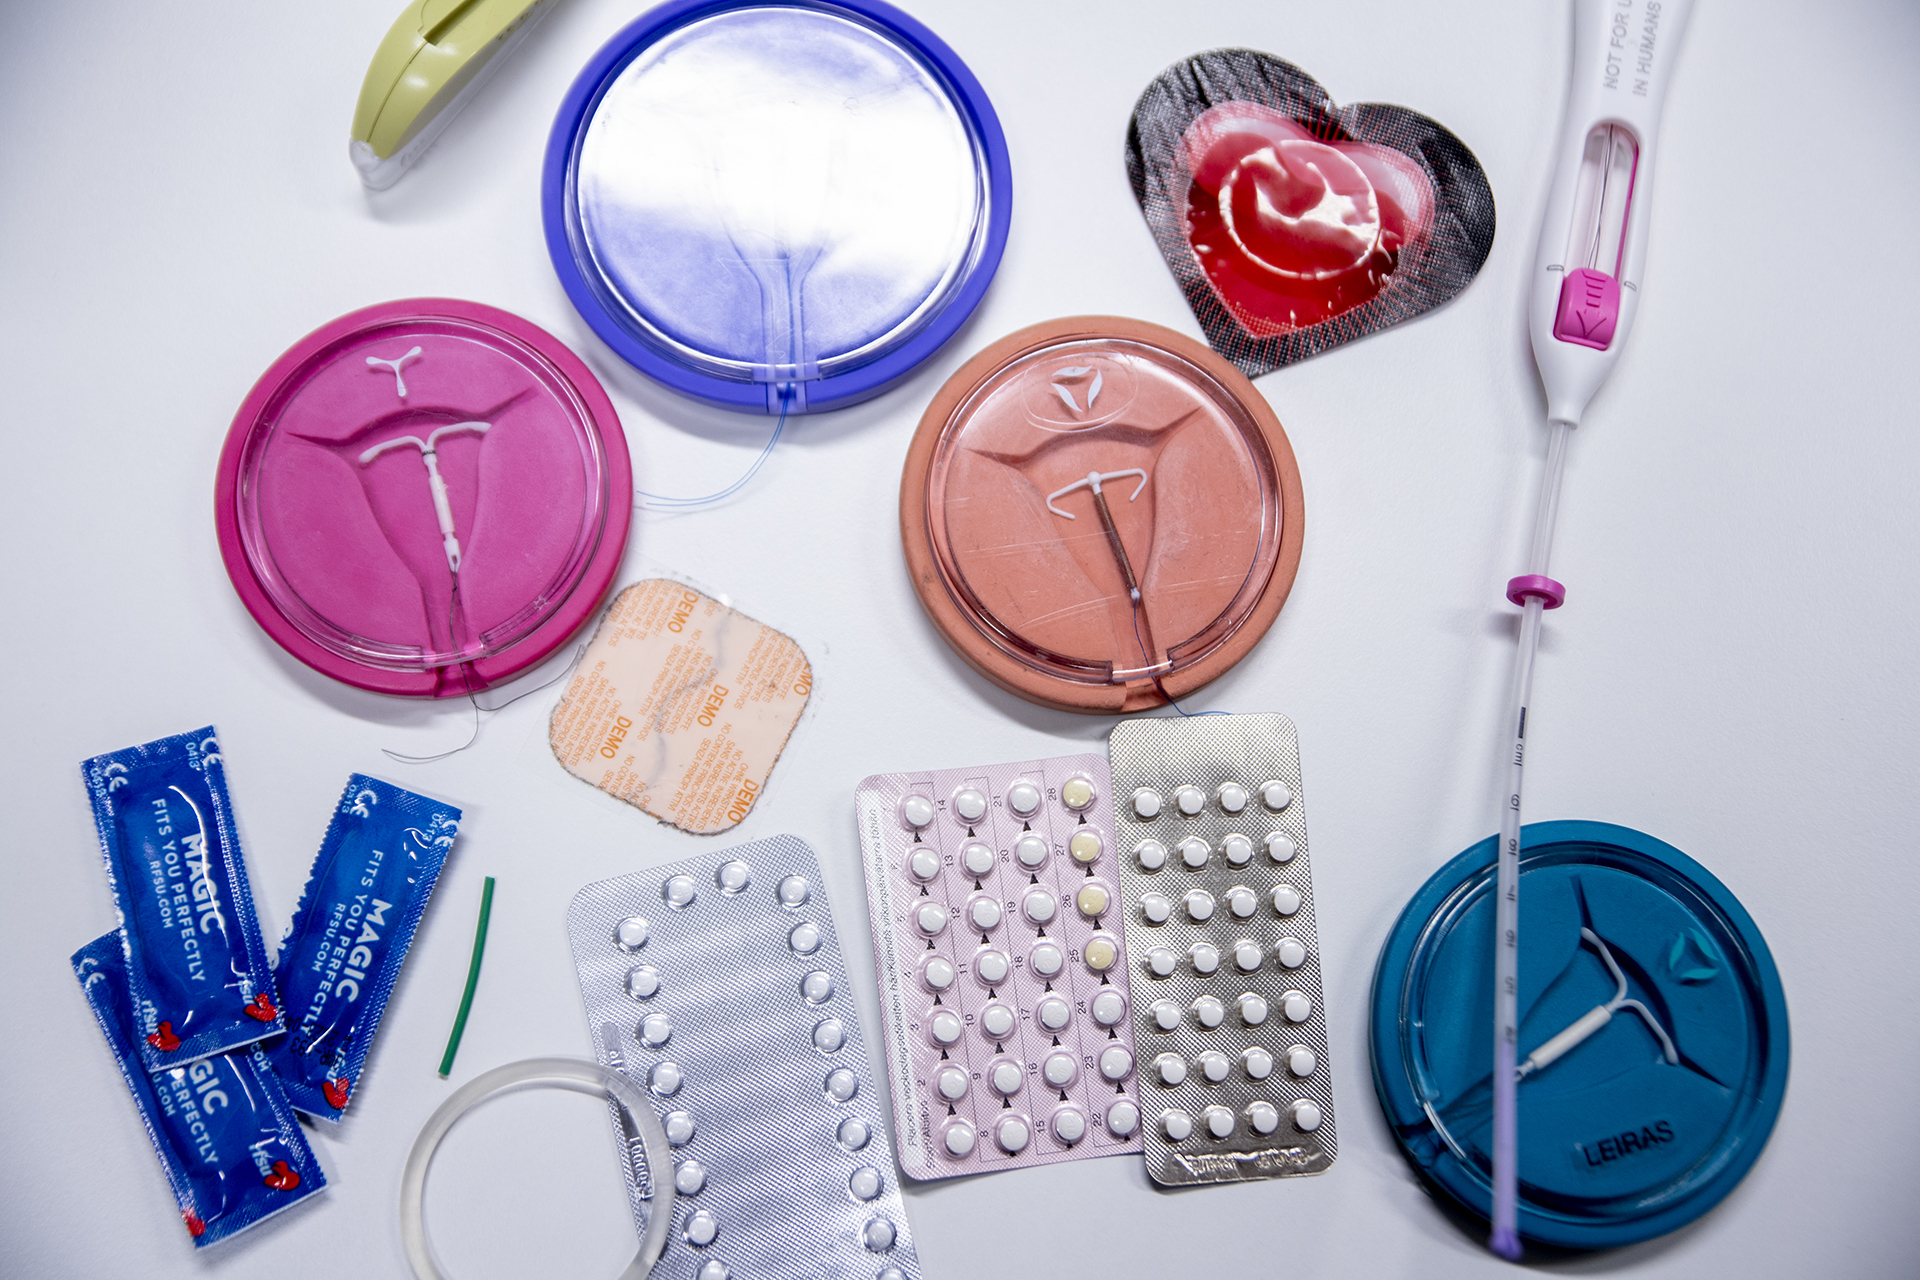 The Christian Democrats want free contraception for those under 25